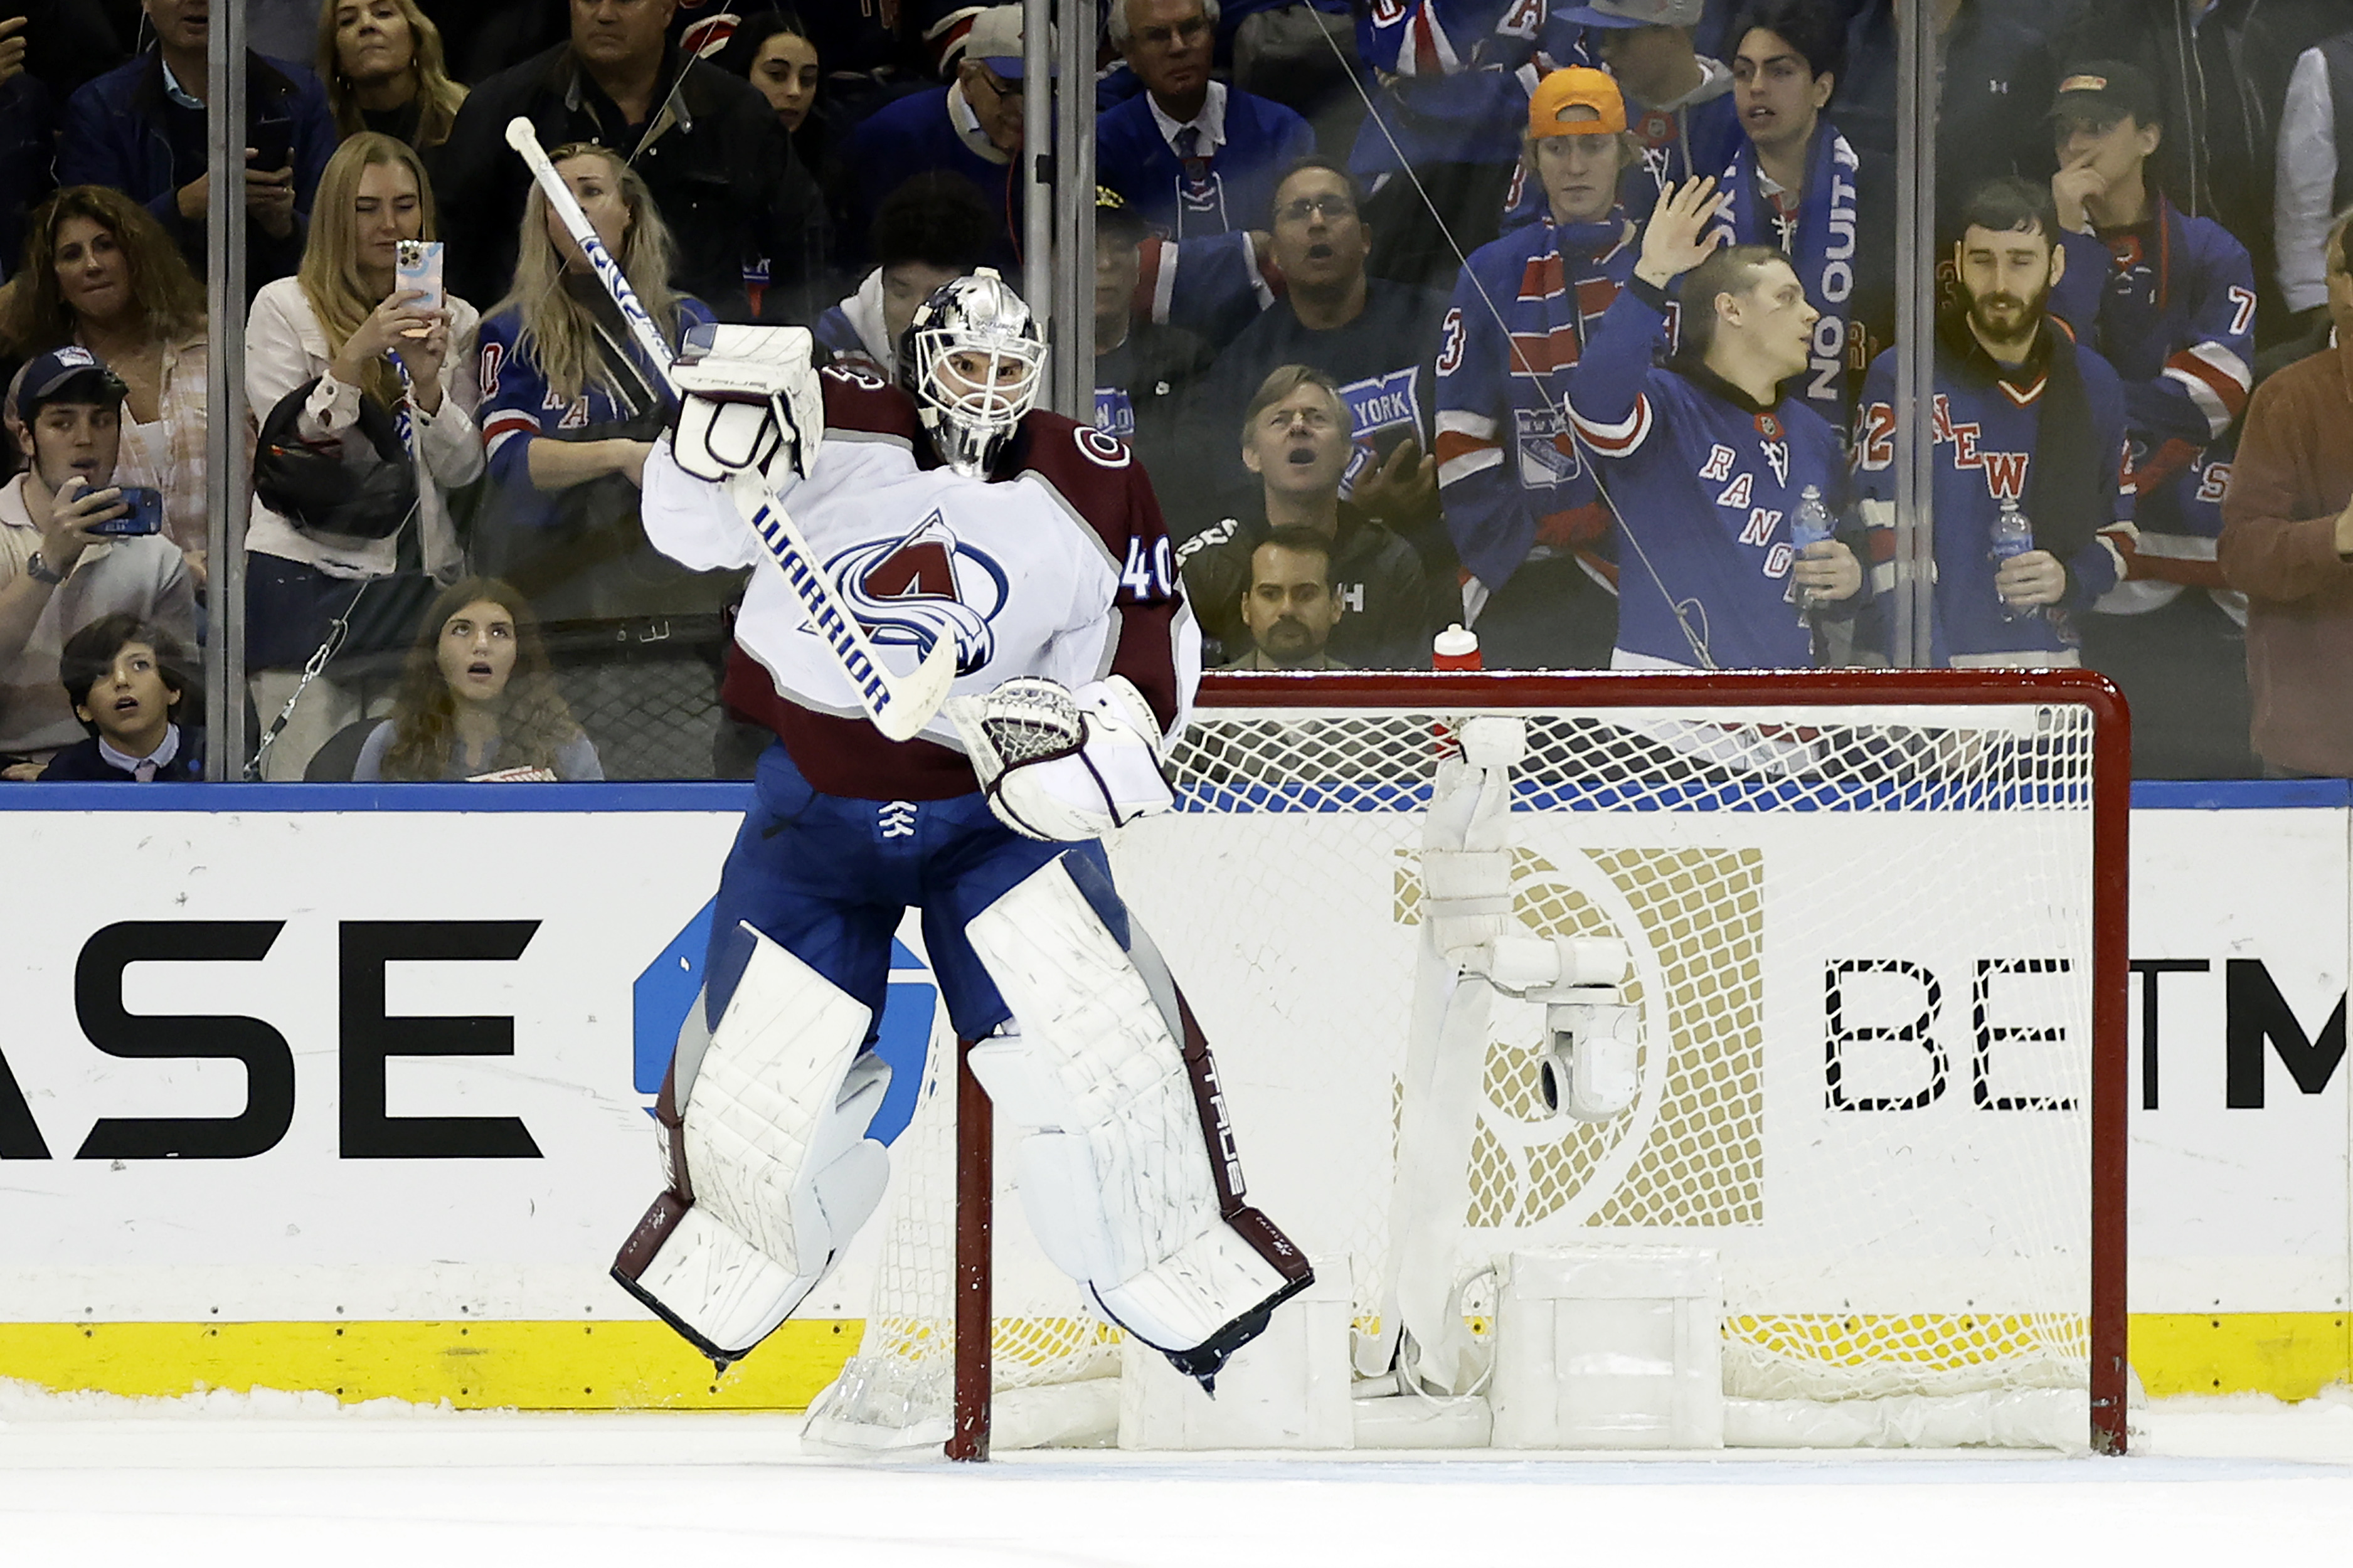 This team is writing history! - Colorado Avalanche